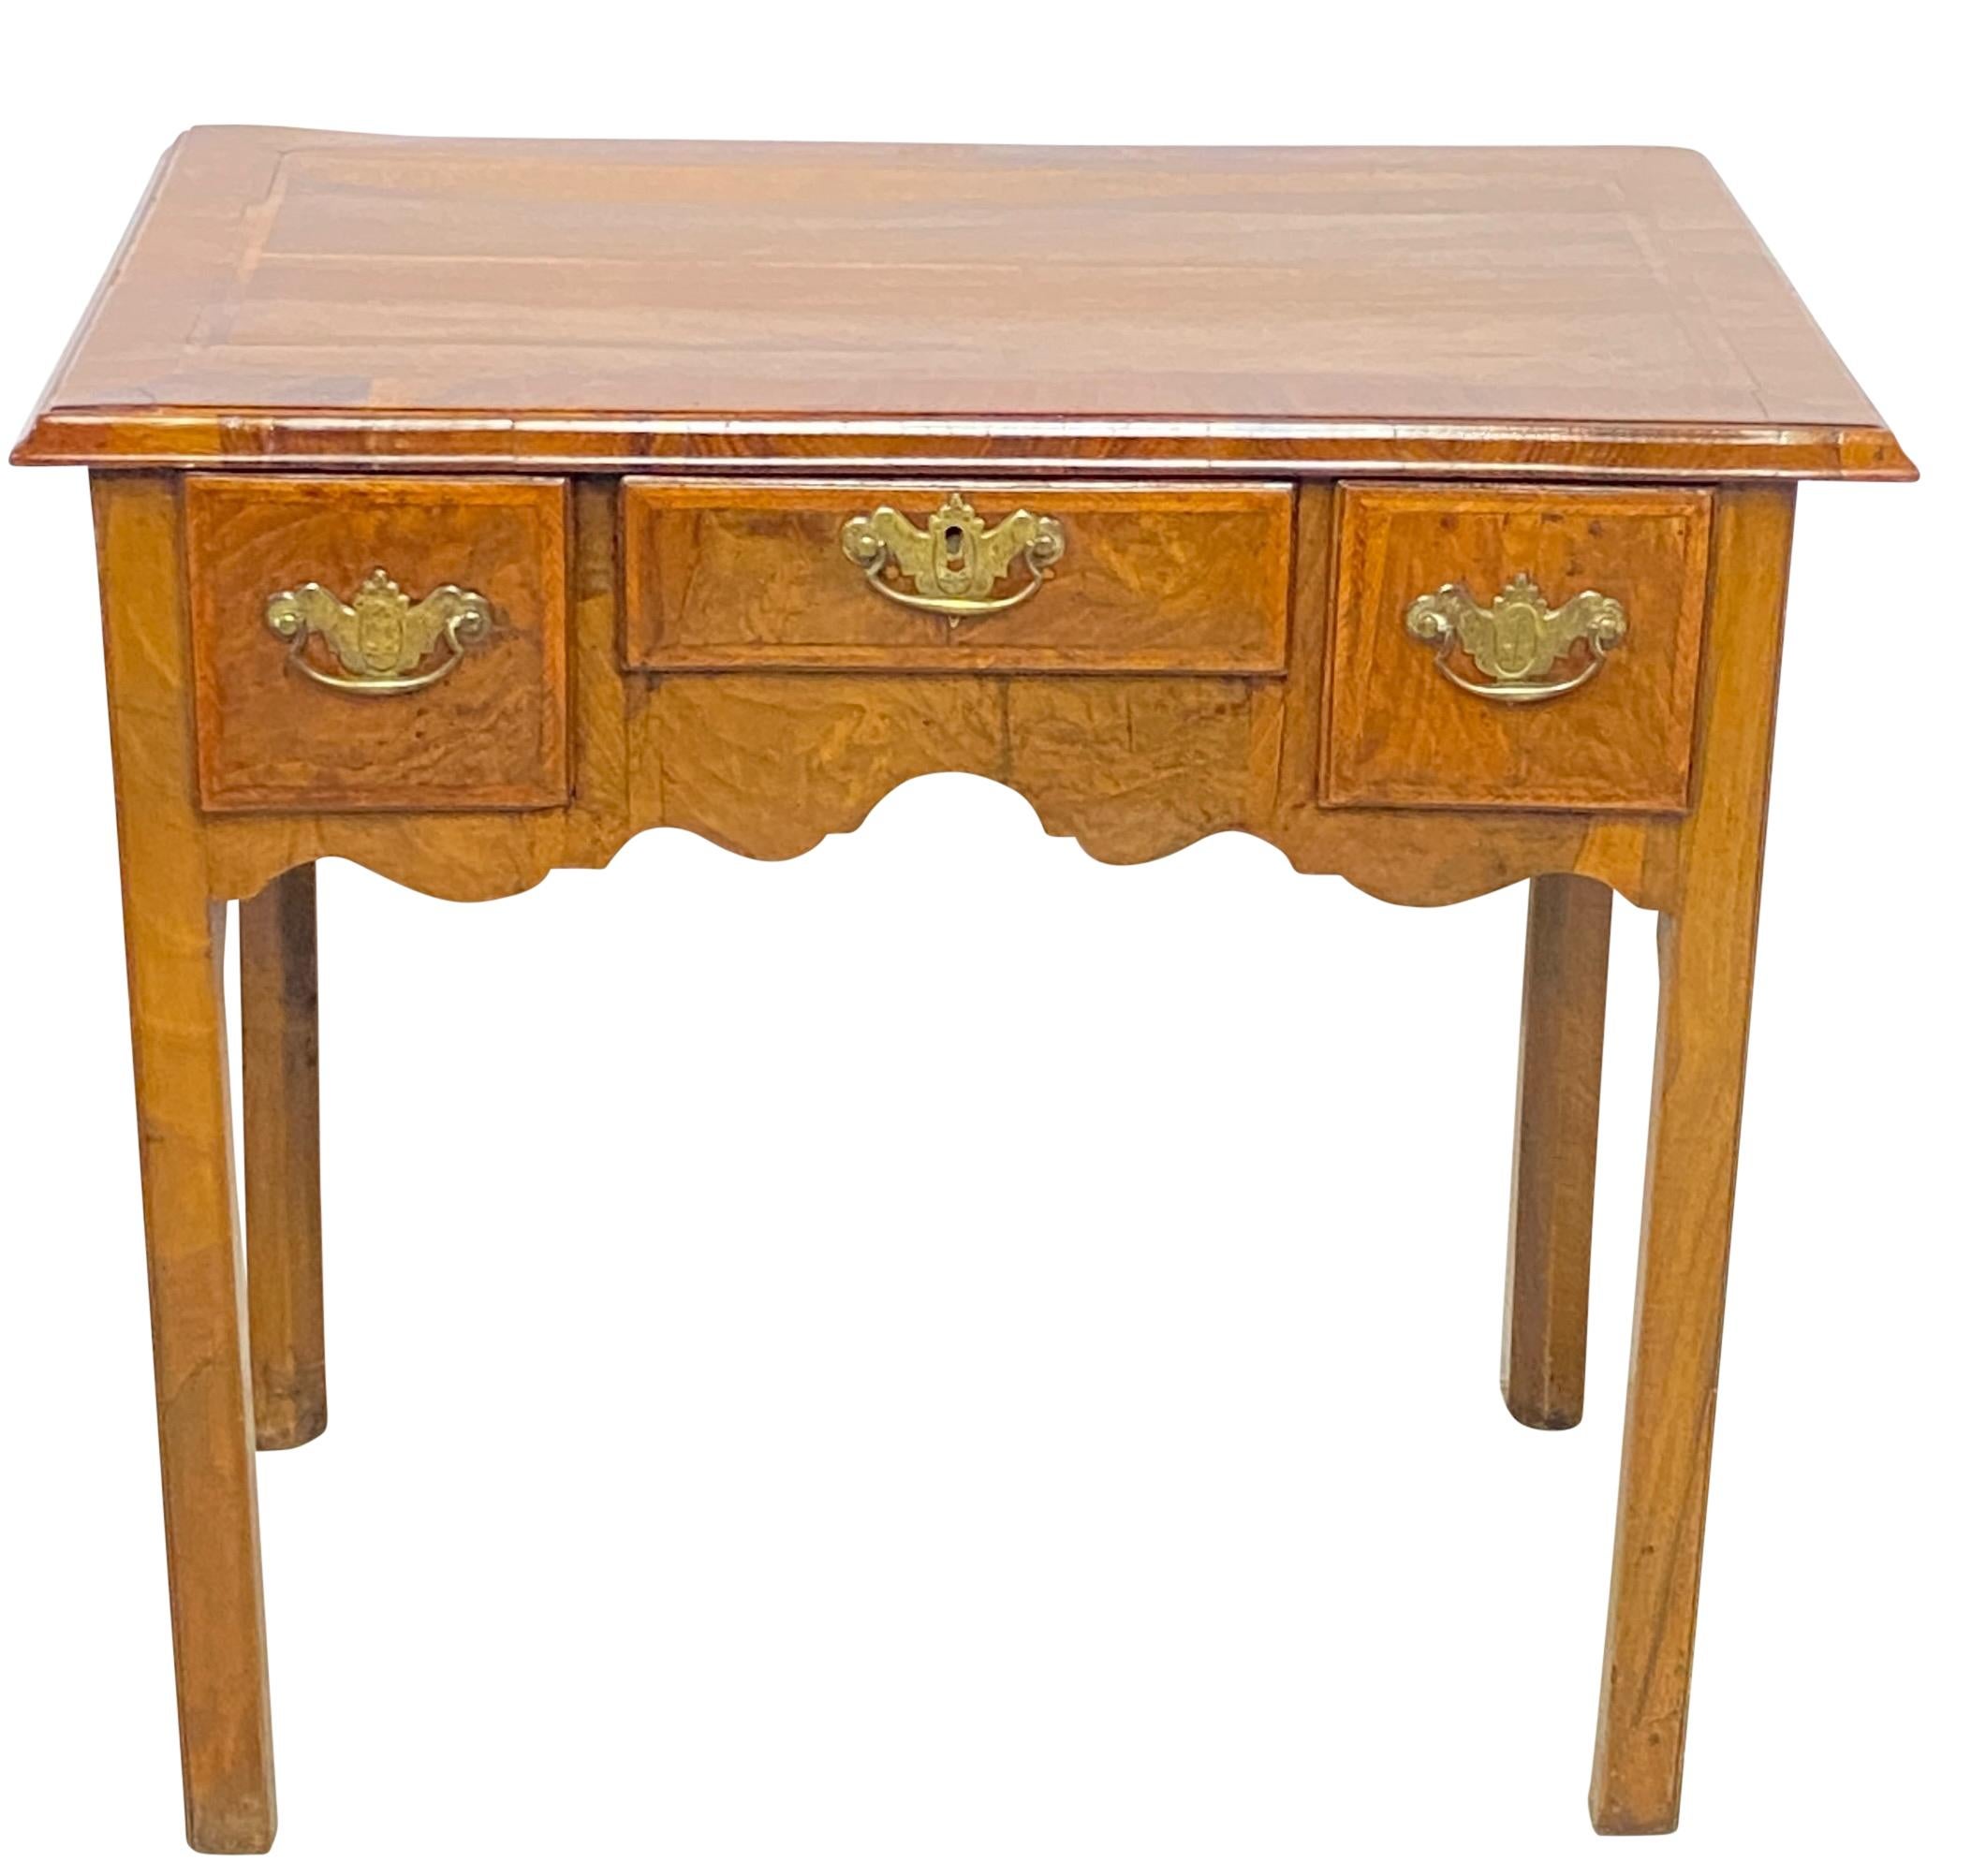 Brass 18th Century English Walnut Writing Table Desk / Dressing Table For Sale